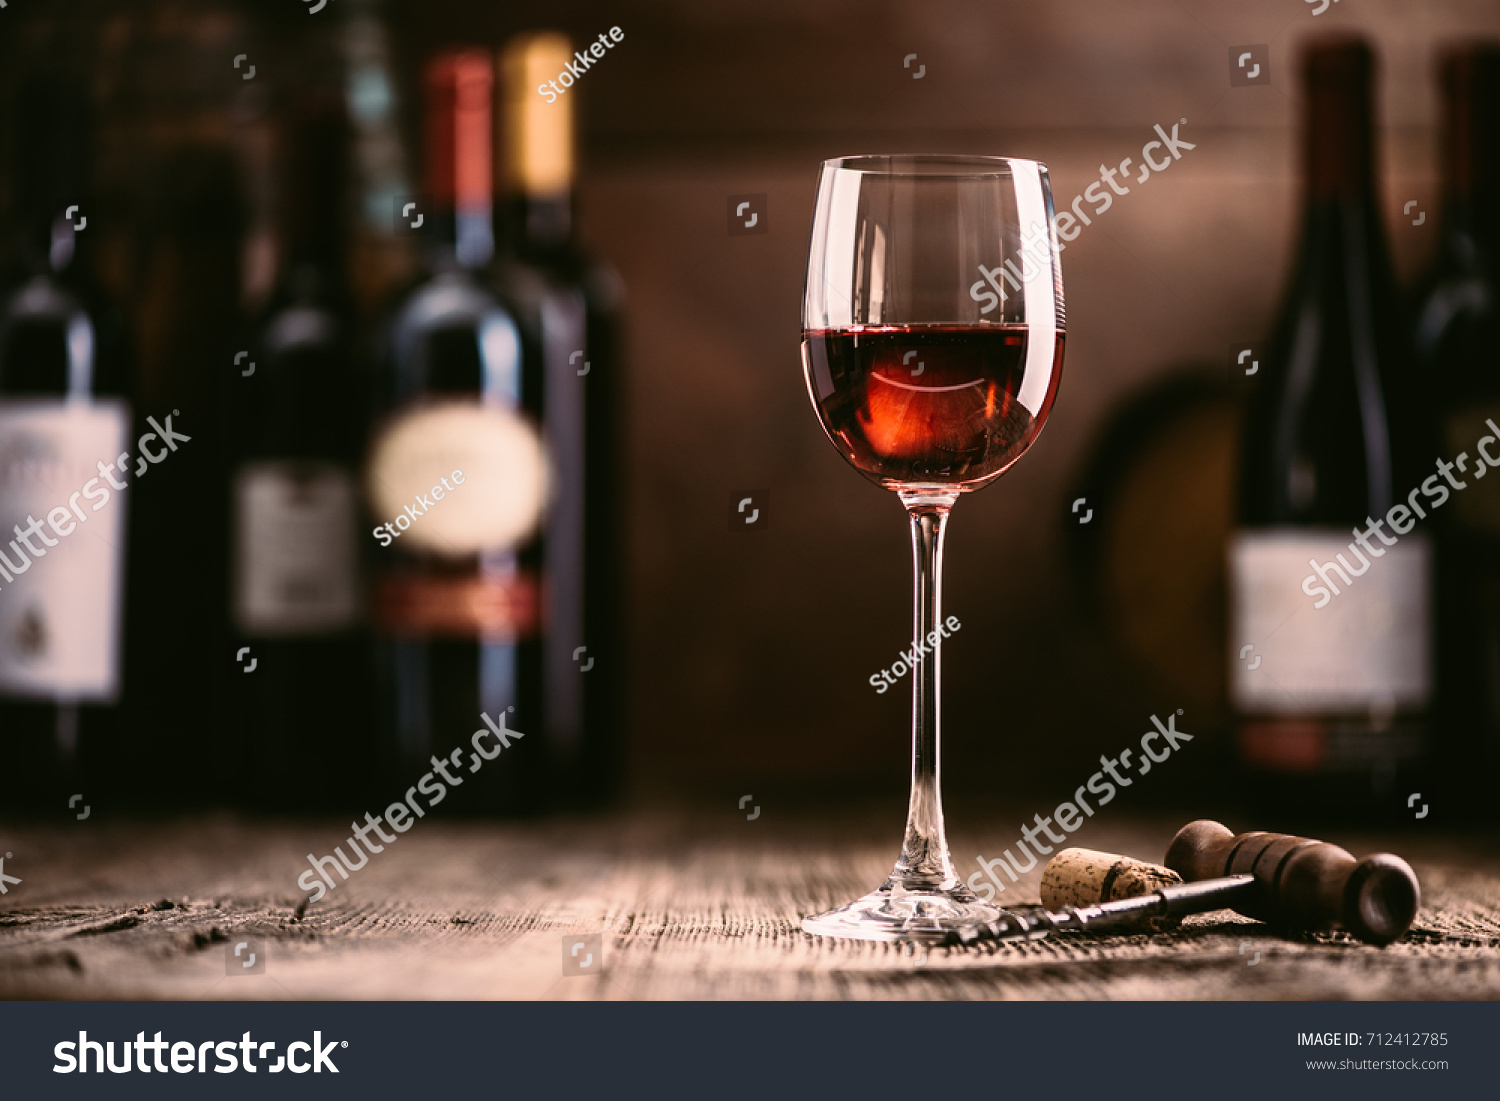 Wine tasting experience in the rustic cellar and wine bar: red wine glass and collection of excellent wines on the background #712412785